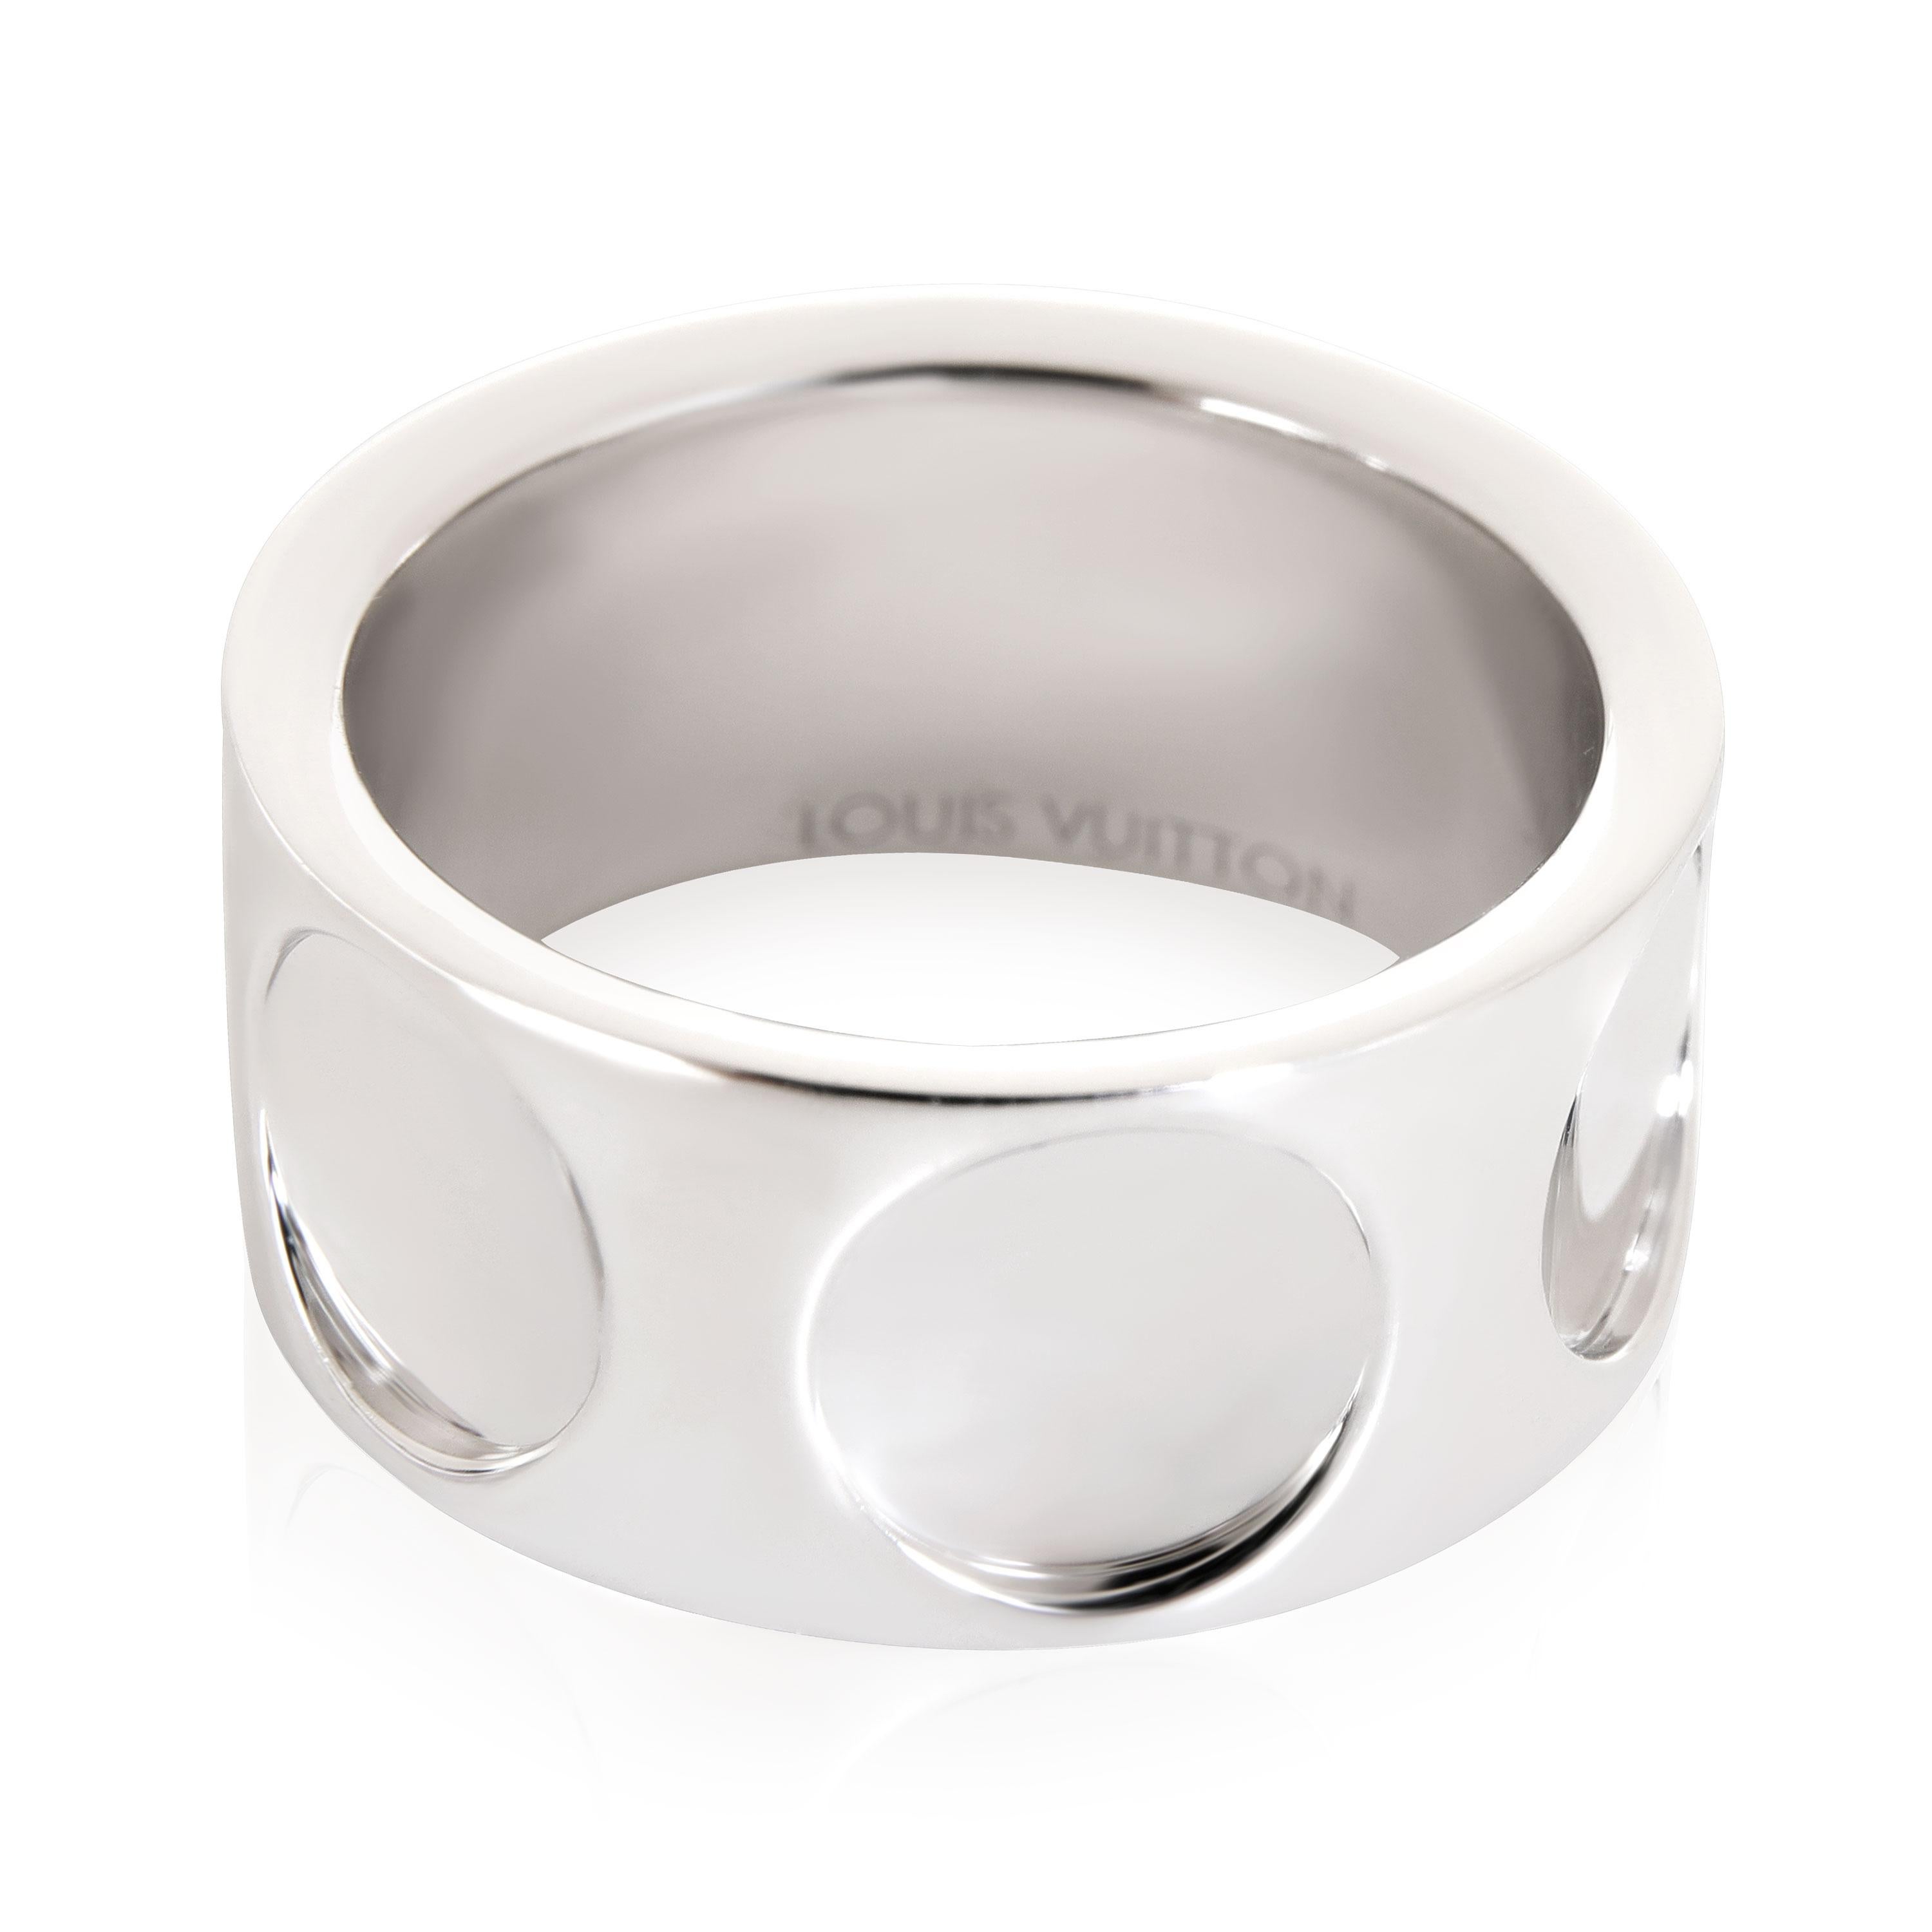 Louis Vuitton Large Empreinte Ring in 18k White Gold

PRIMARY DETAILS
SKU: 114919
Listing Title: Louis Vuitton Large Empreinte Ring in 18k White Gold
Condition Description: Retails for 3400 USD. In excellent condition and recently polished. Ring